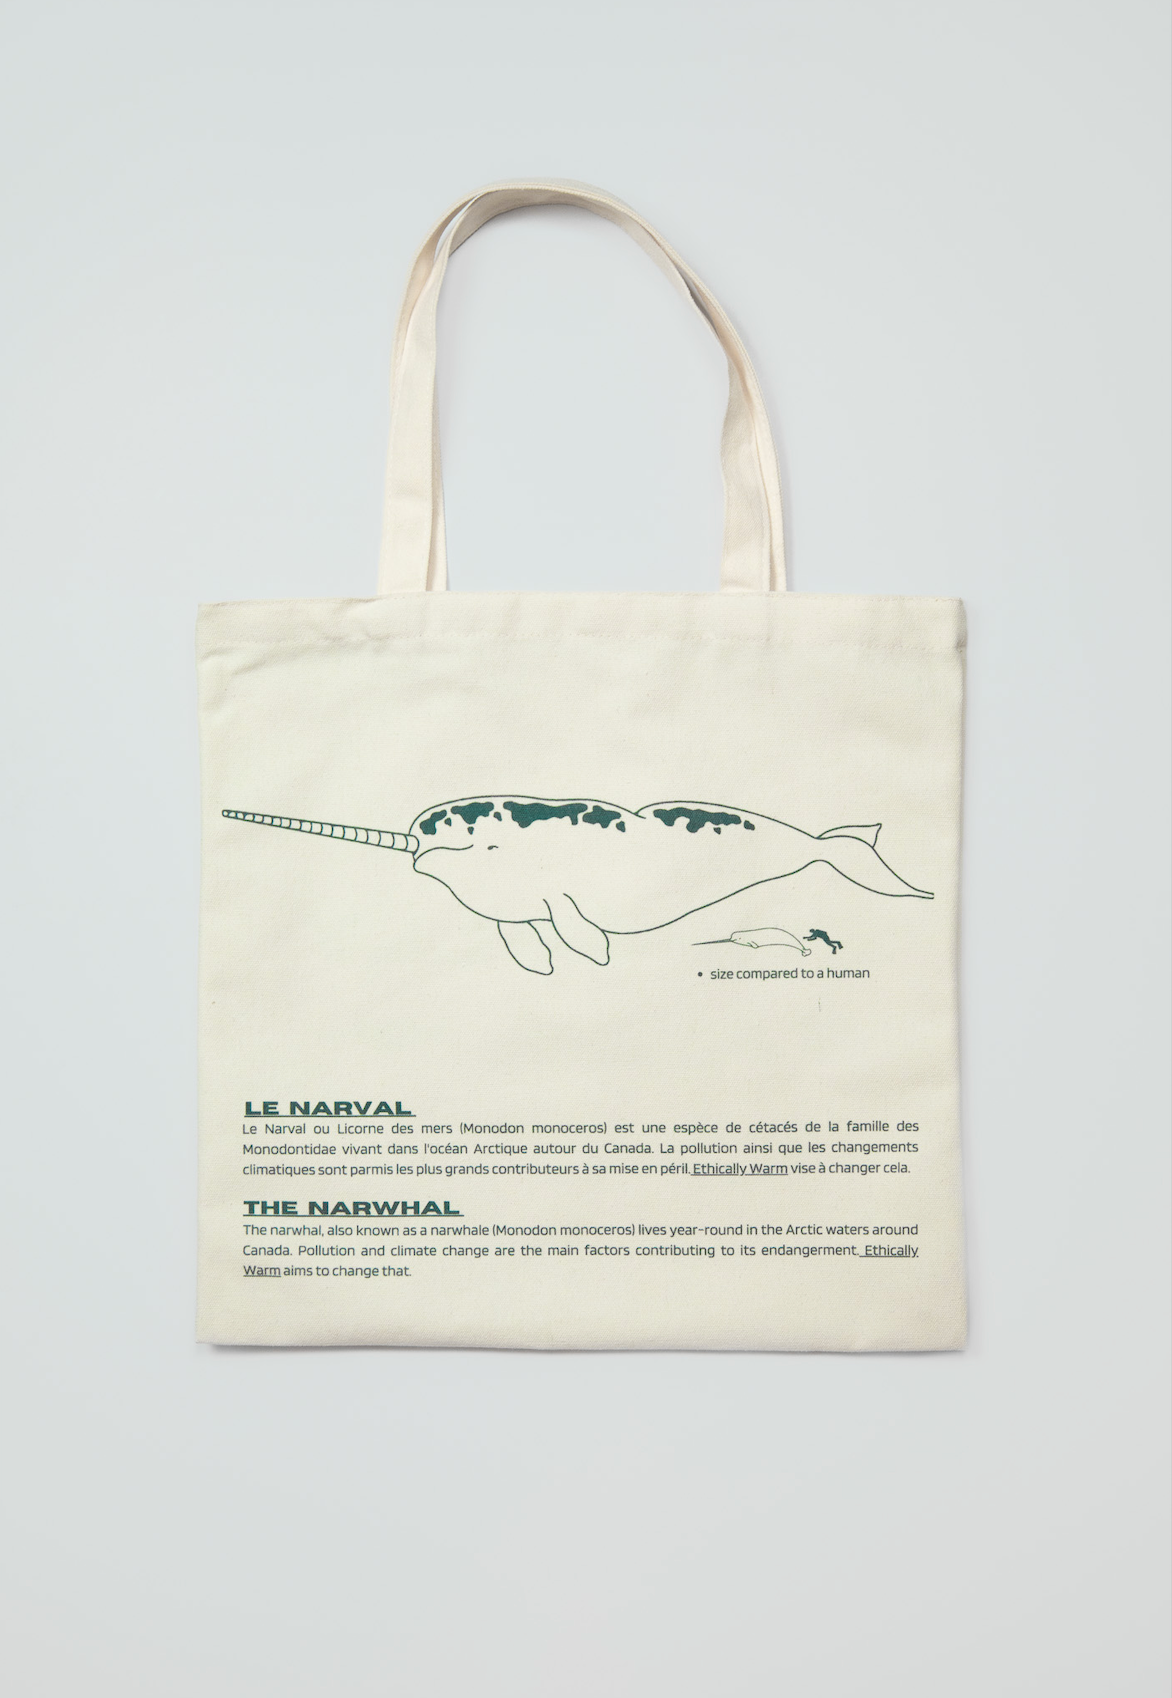 Narwhal tote bags